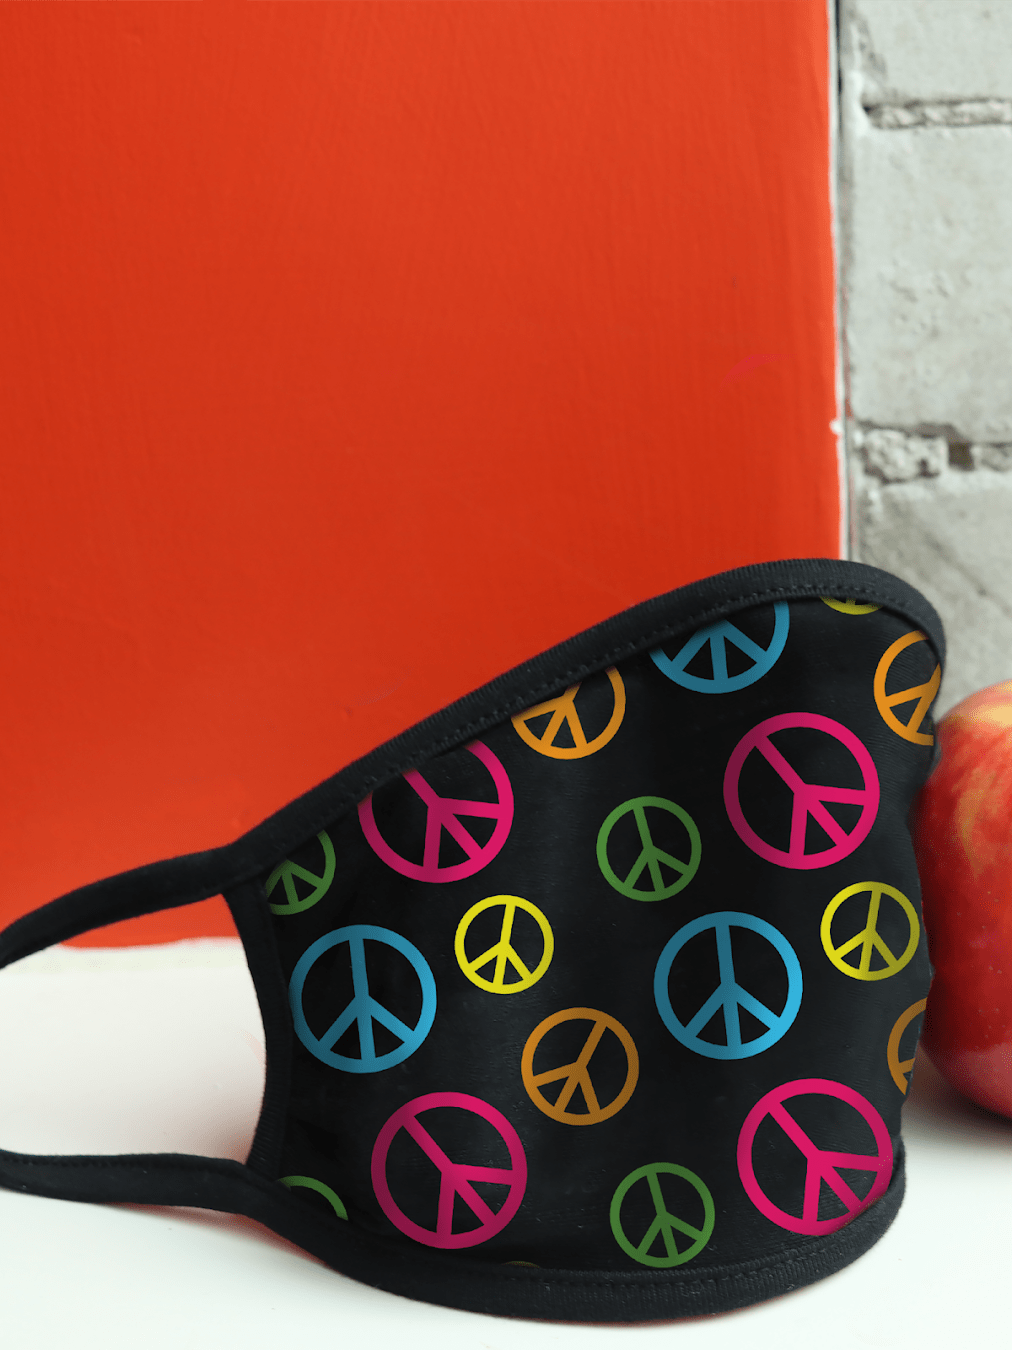 21 Practical Back To School Gifts For Teachers That Will Show Them You Care